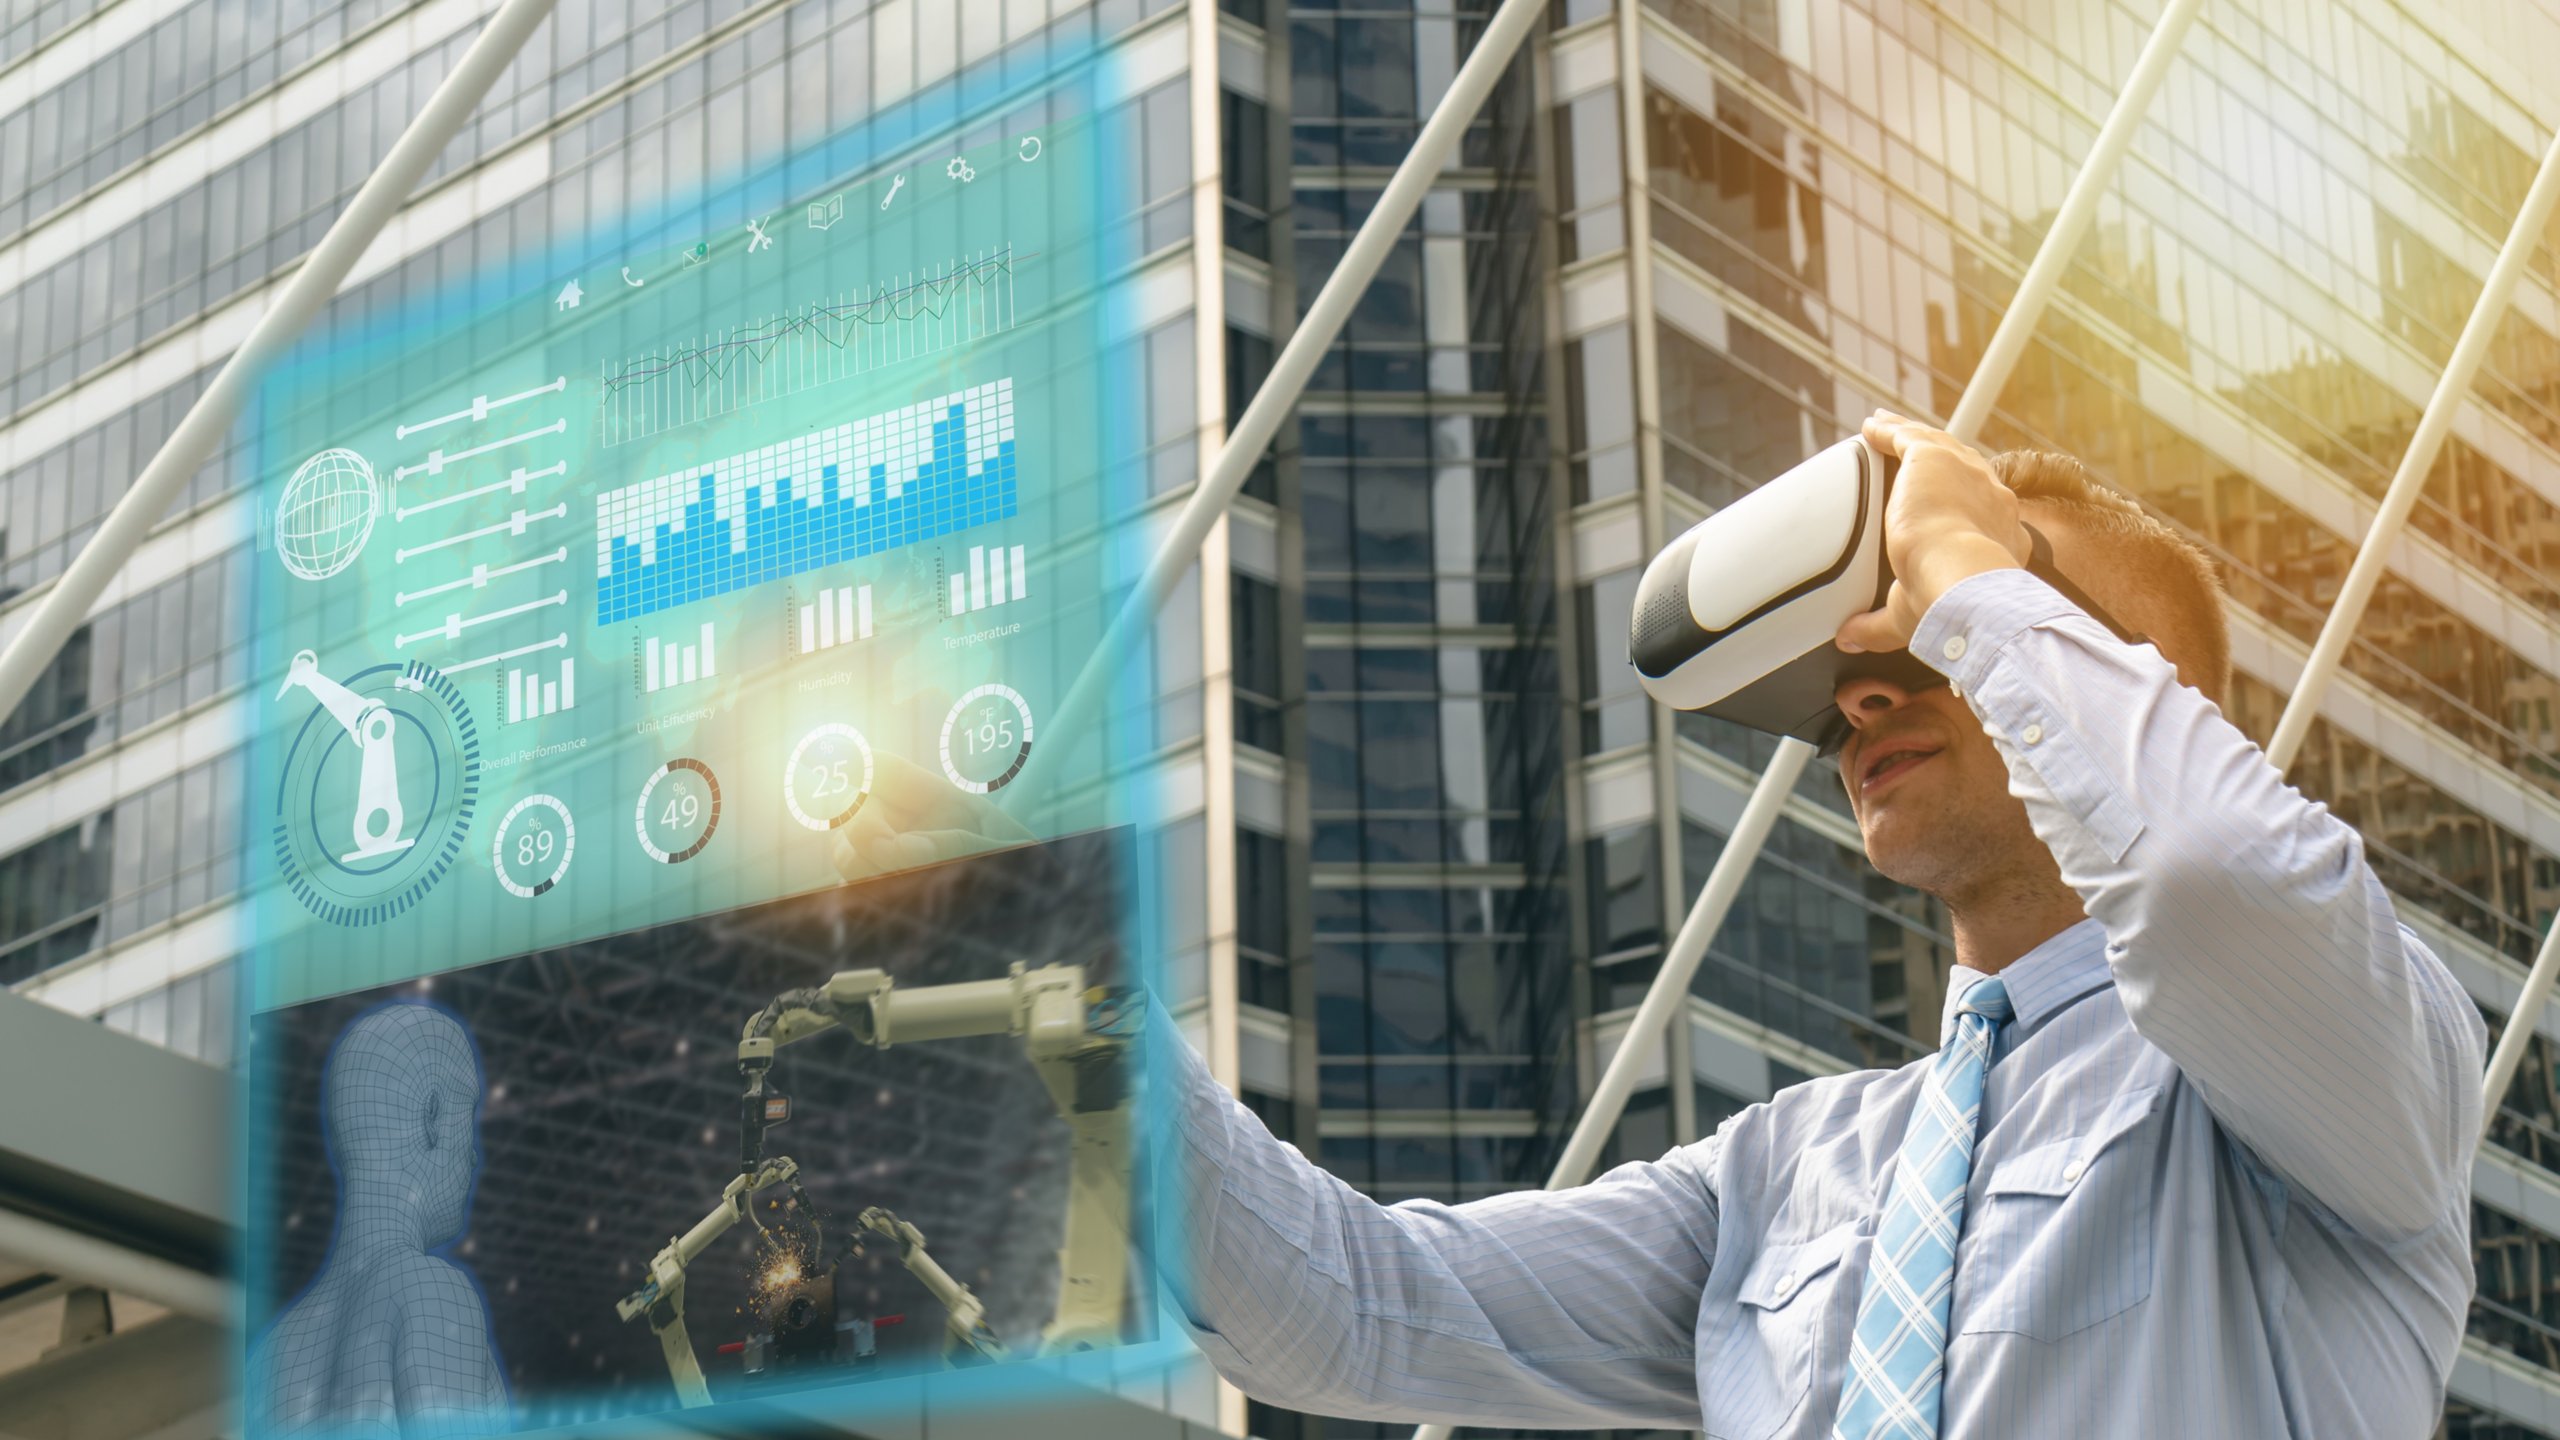 iot industry 4.0 concept,industrial engineer using smart glasses with augmented mixed with virtual reality technology and use artificial intelligence to monitoring,control, adjust machine in real time